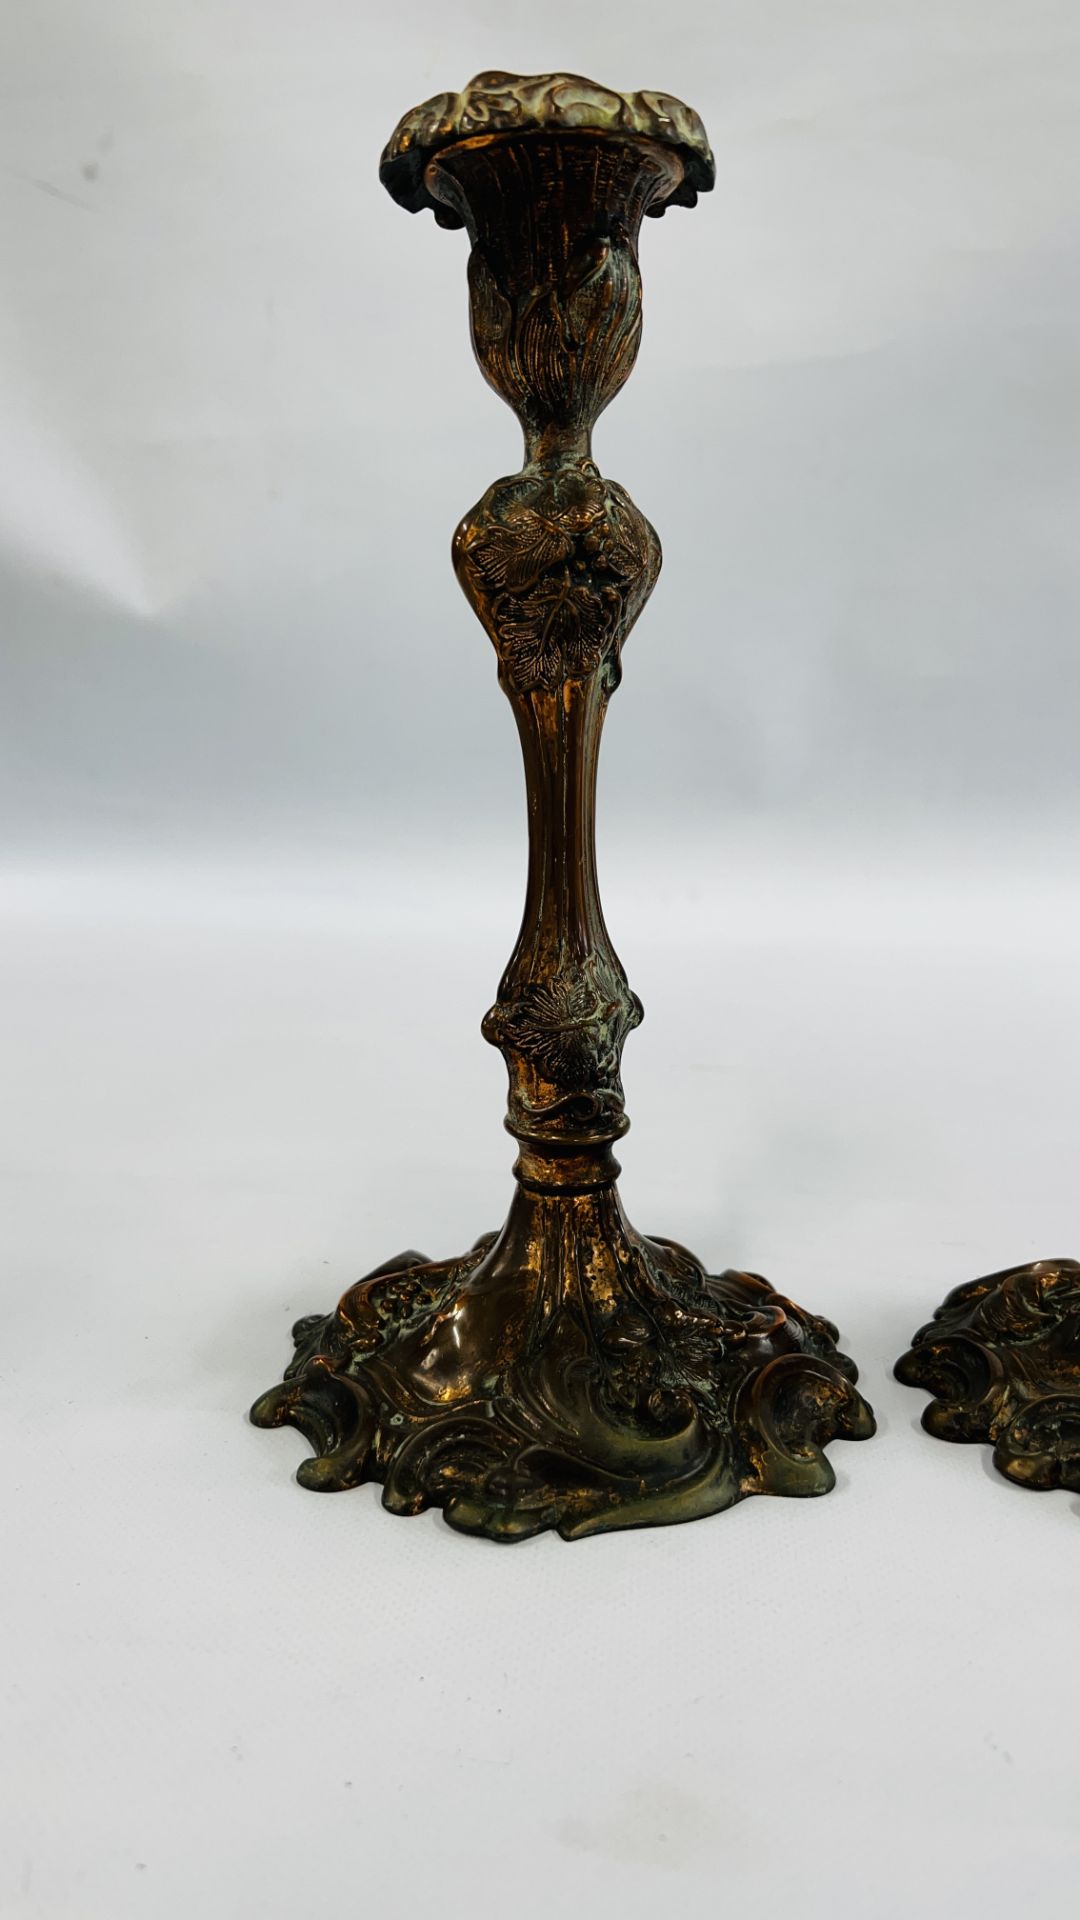 A PAIR OF ORNATE C19TH COPPER CANDLESTICKS WITH DETACHABLE SCONCES - HEIGHT 27CM. - Image 2 of 20